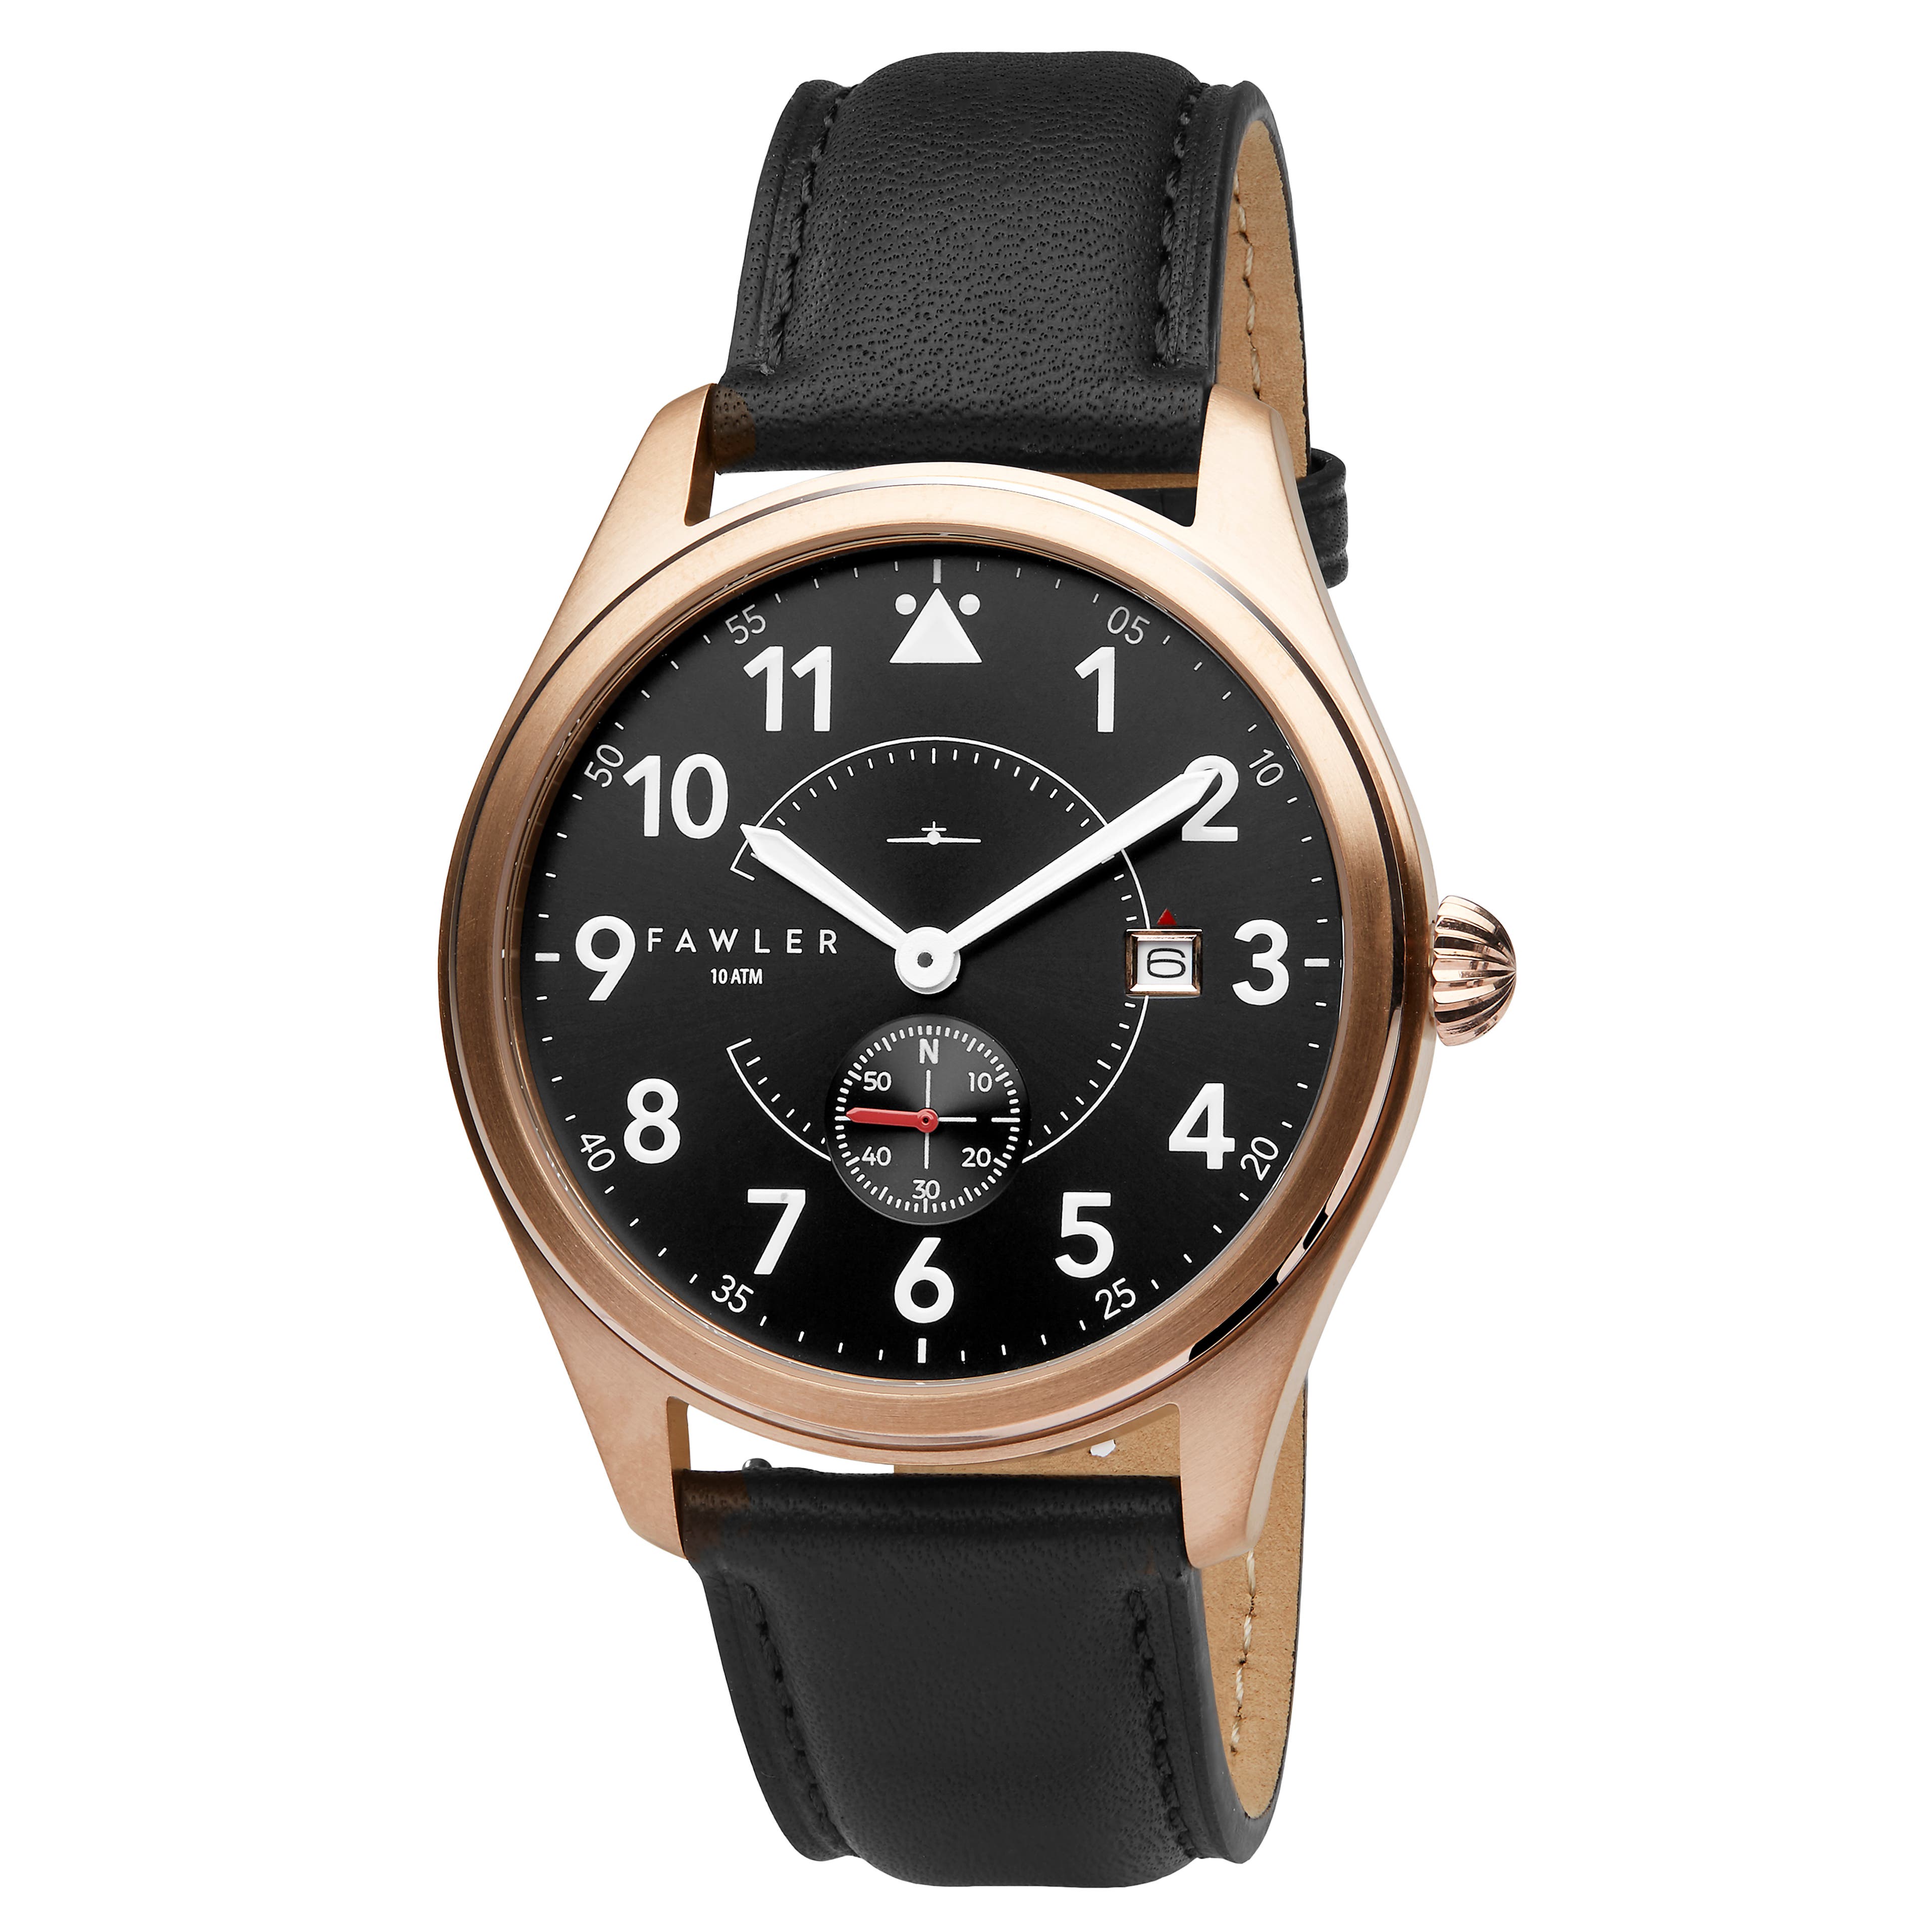 Aviator | Rose Gold-Tone Aviator Watch With Black Dial, White Numbers & Black Leather Strap